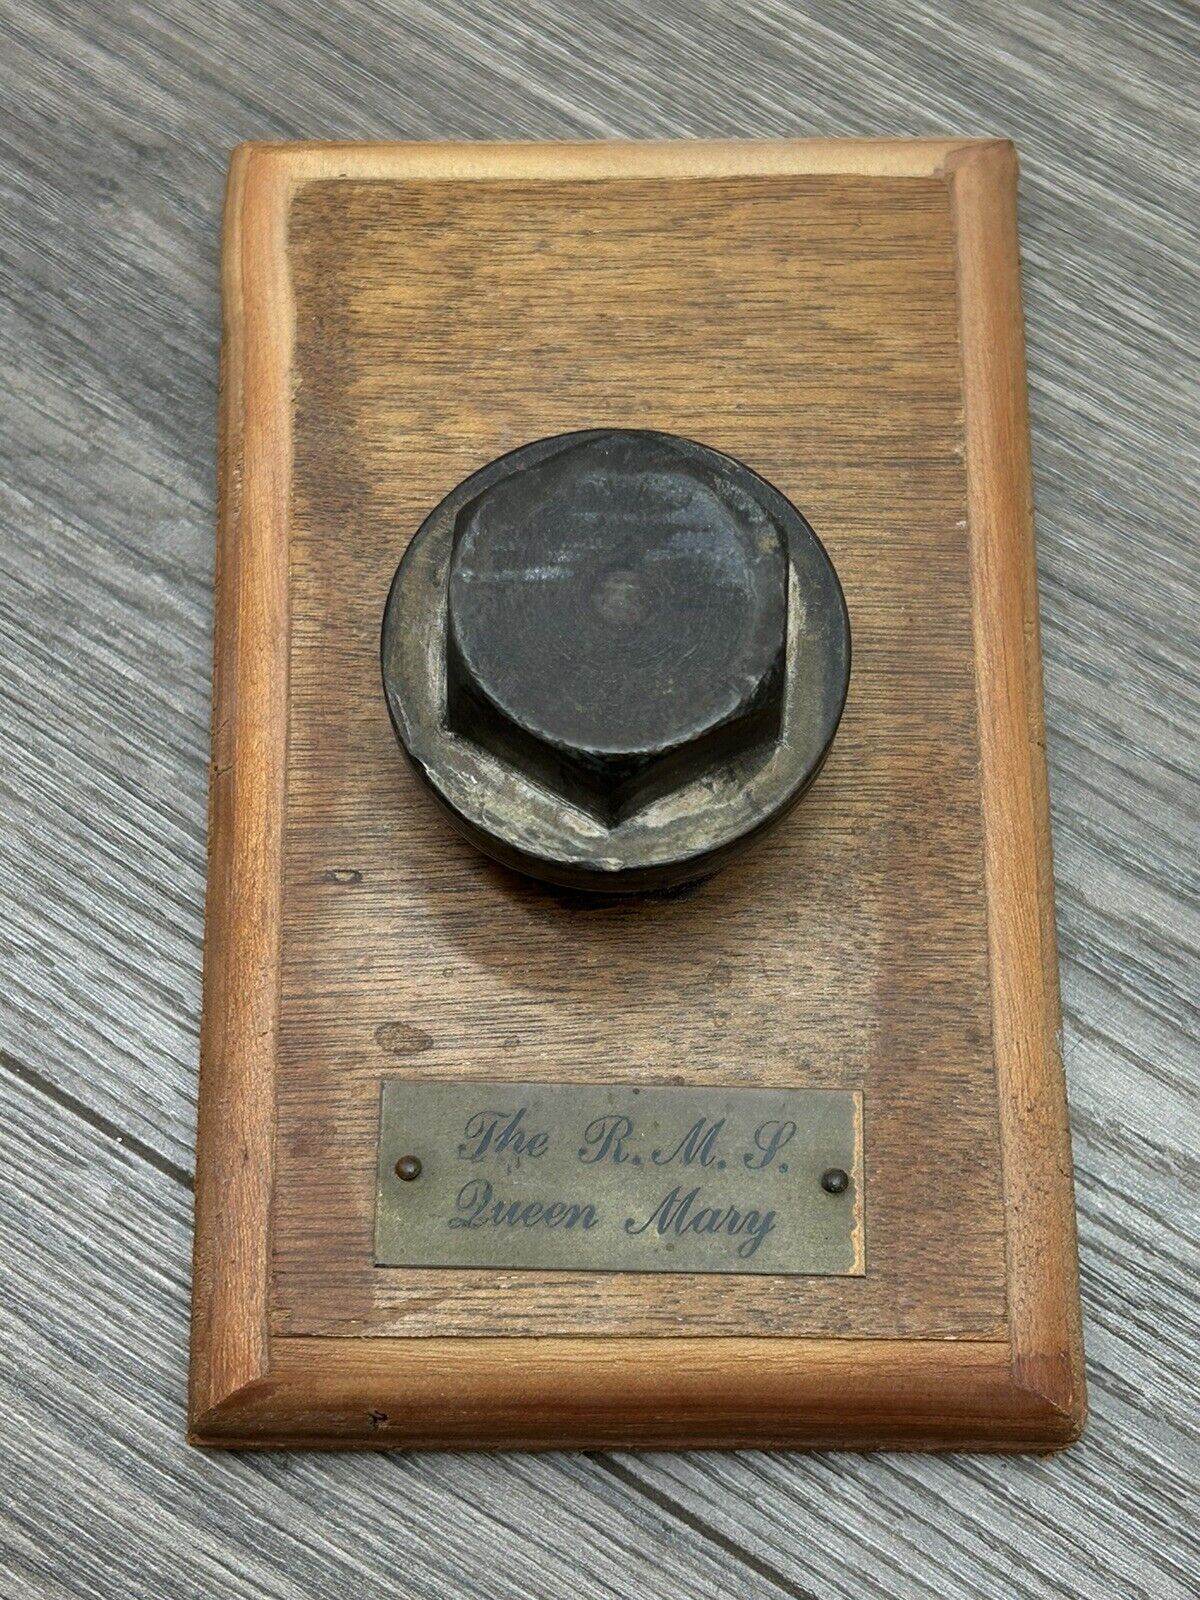 RMS Queen Mary Salvaged Condenser Bolt From Cunard 1934 Display Vintage RARE